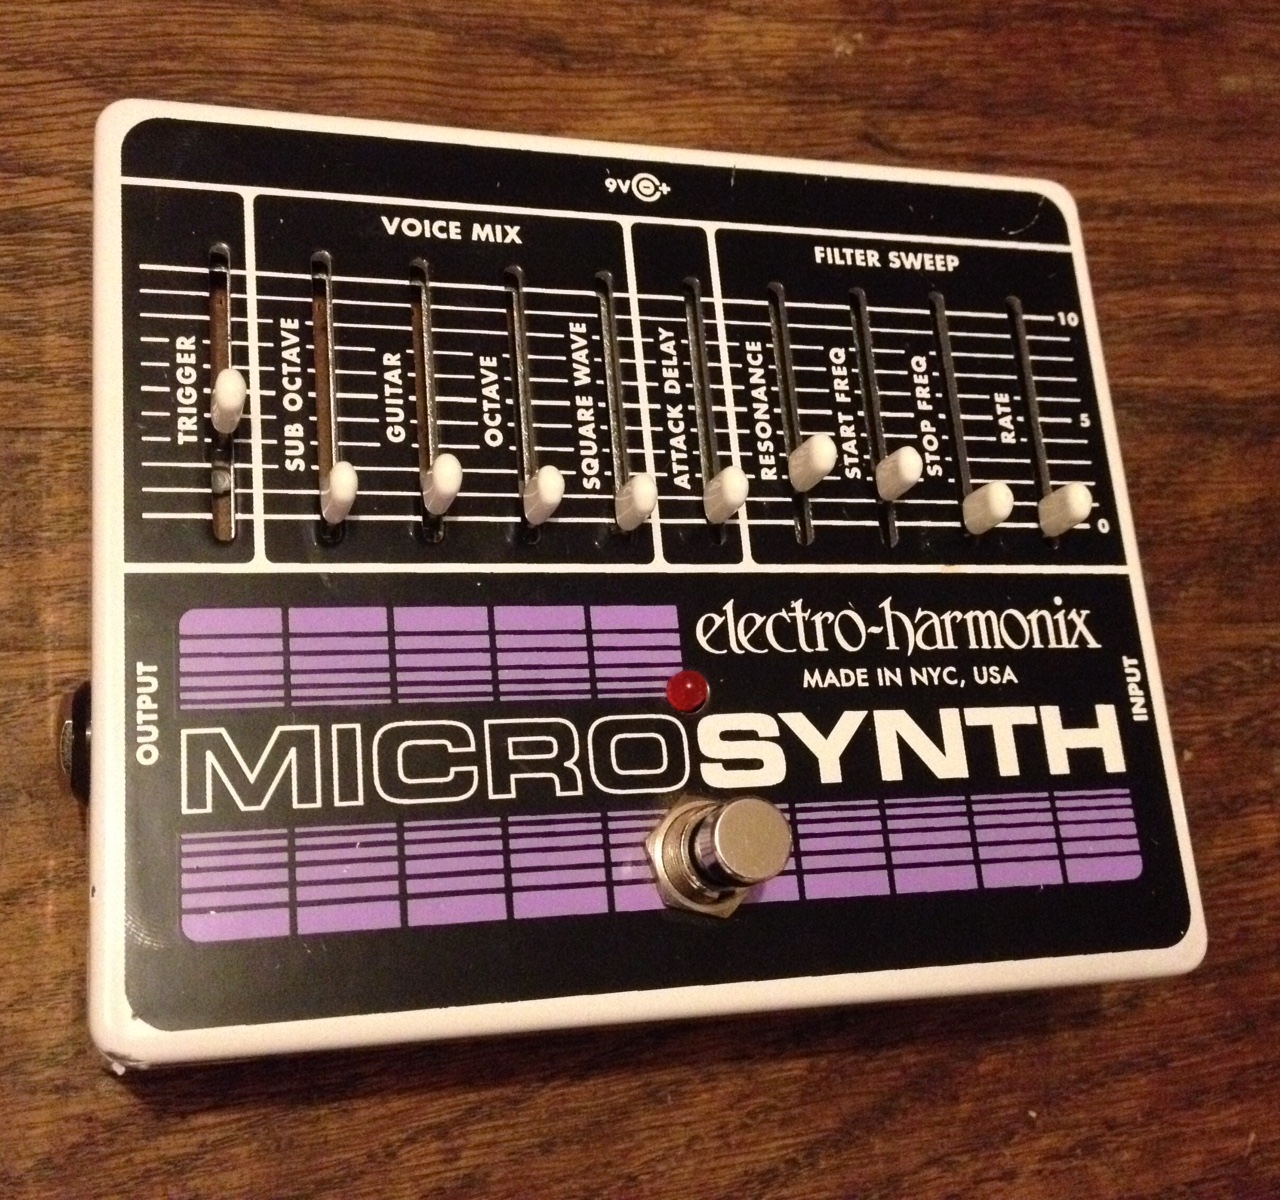 eh microsynth